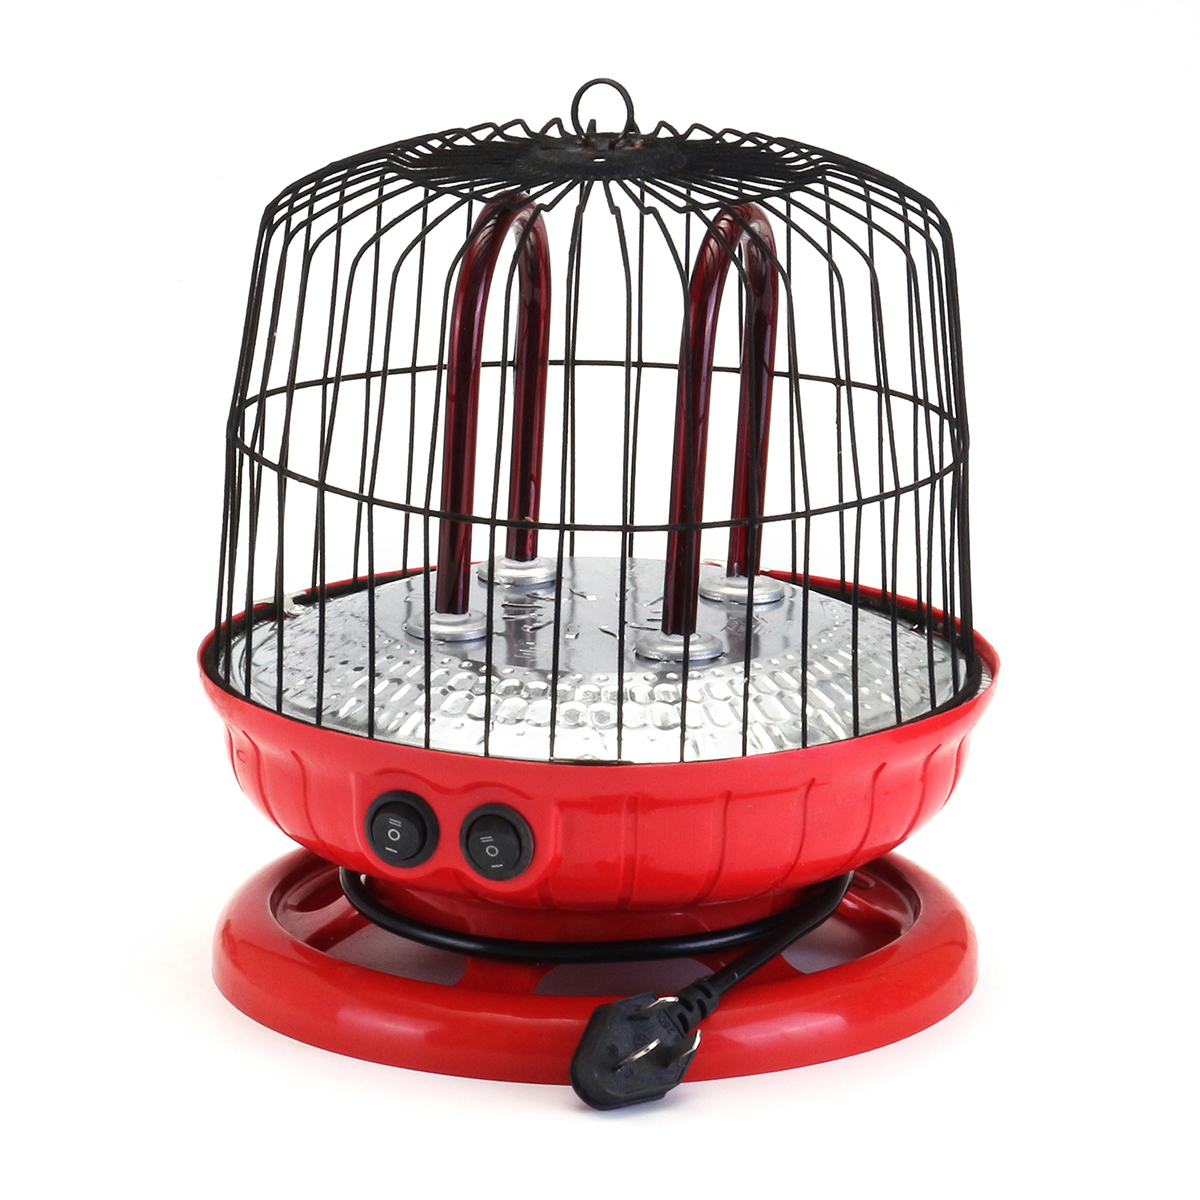 

1200W 220V Mini Heater 360 Degree Portable Space Heater Bird Cage Style Electric Fan